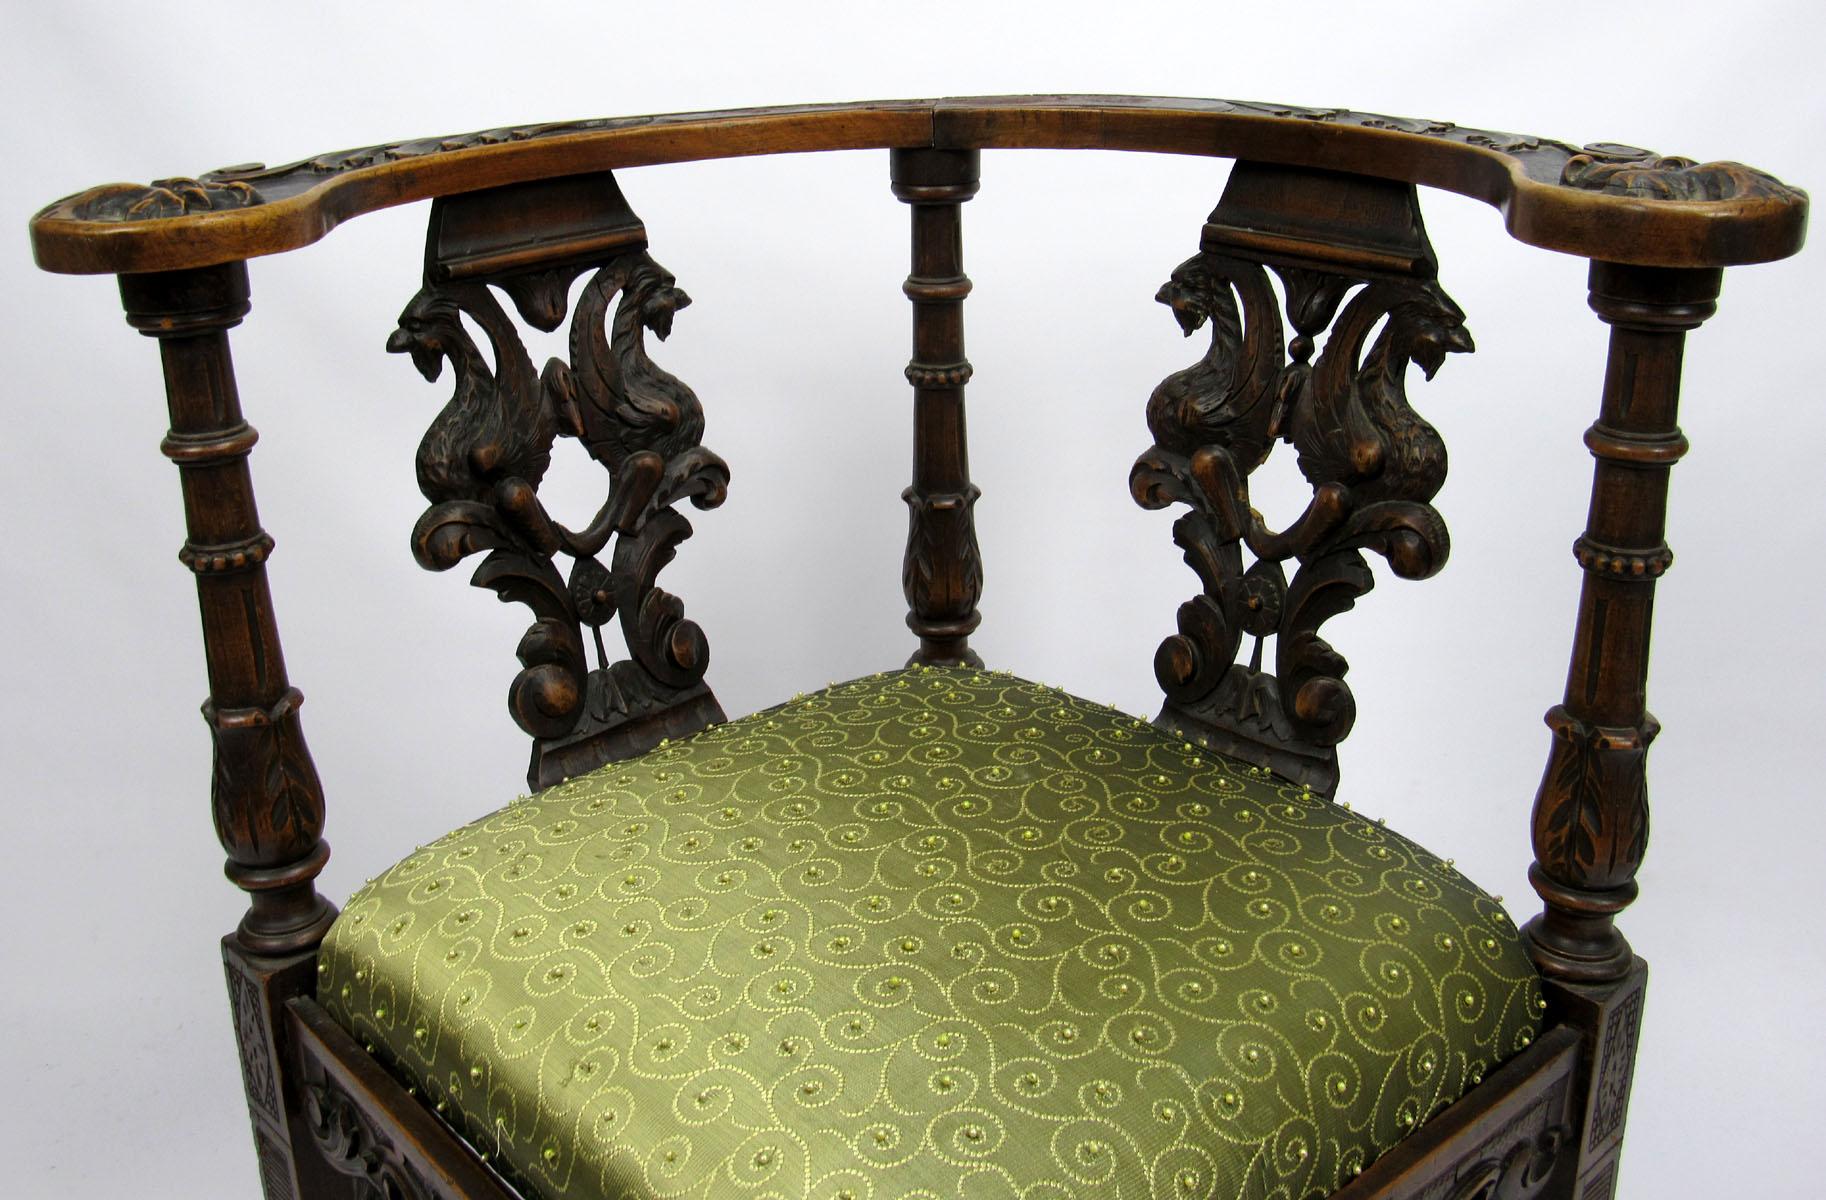 Late 18th or early 19th century Italian desk chair.